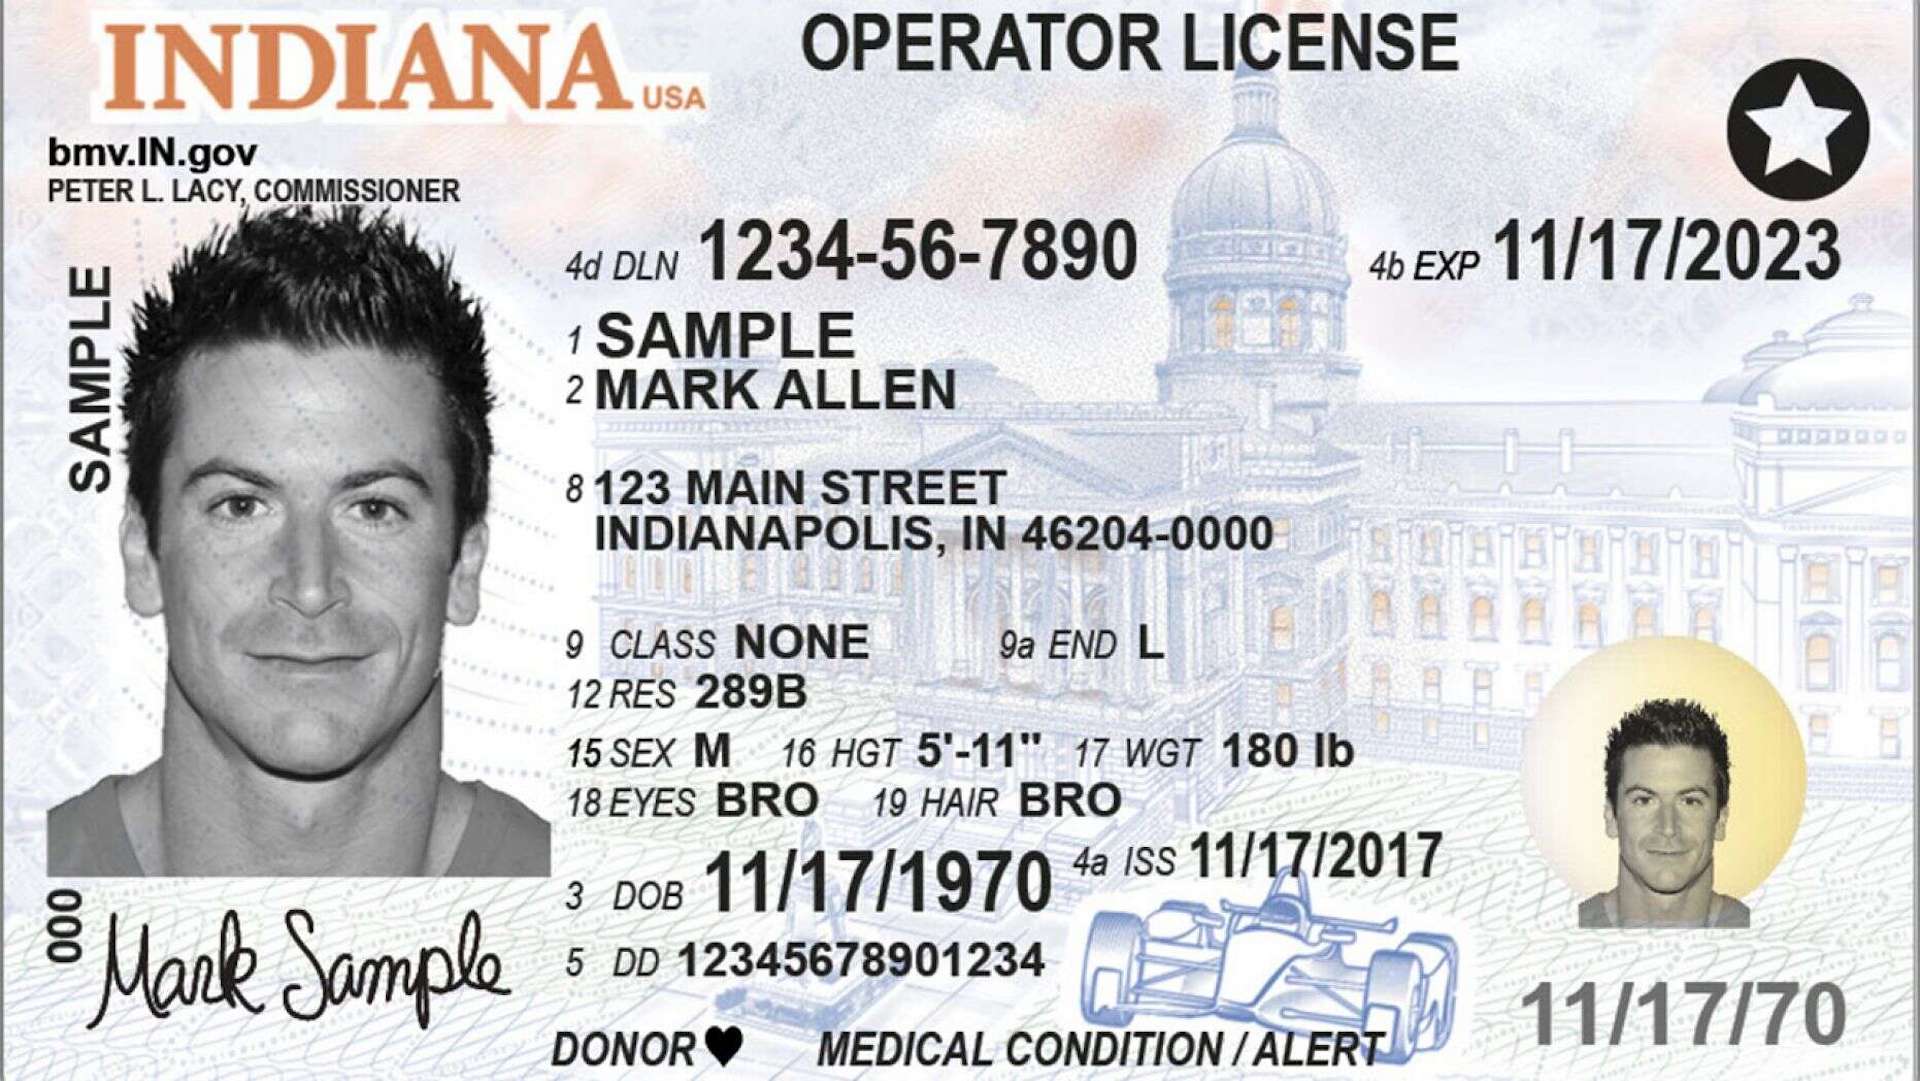 dln meaning on driver's license